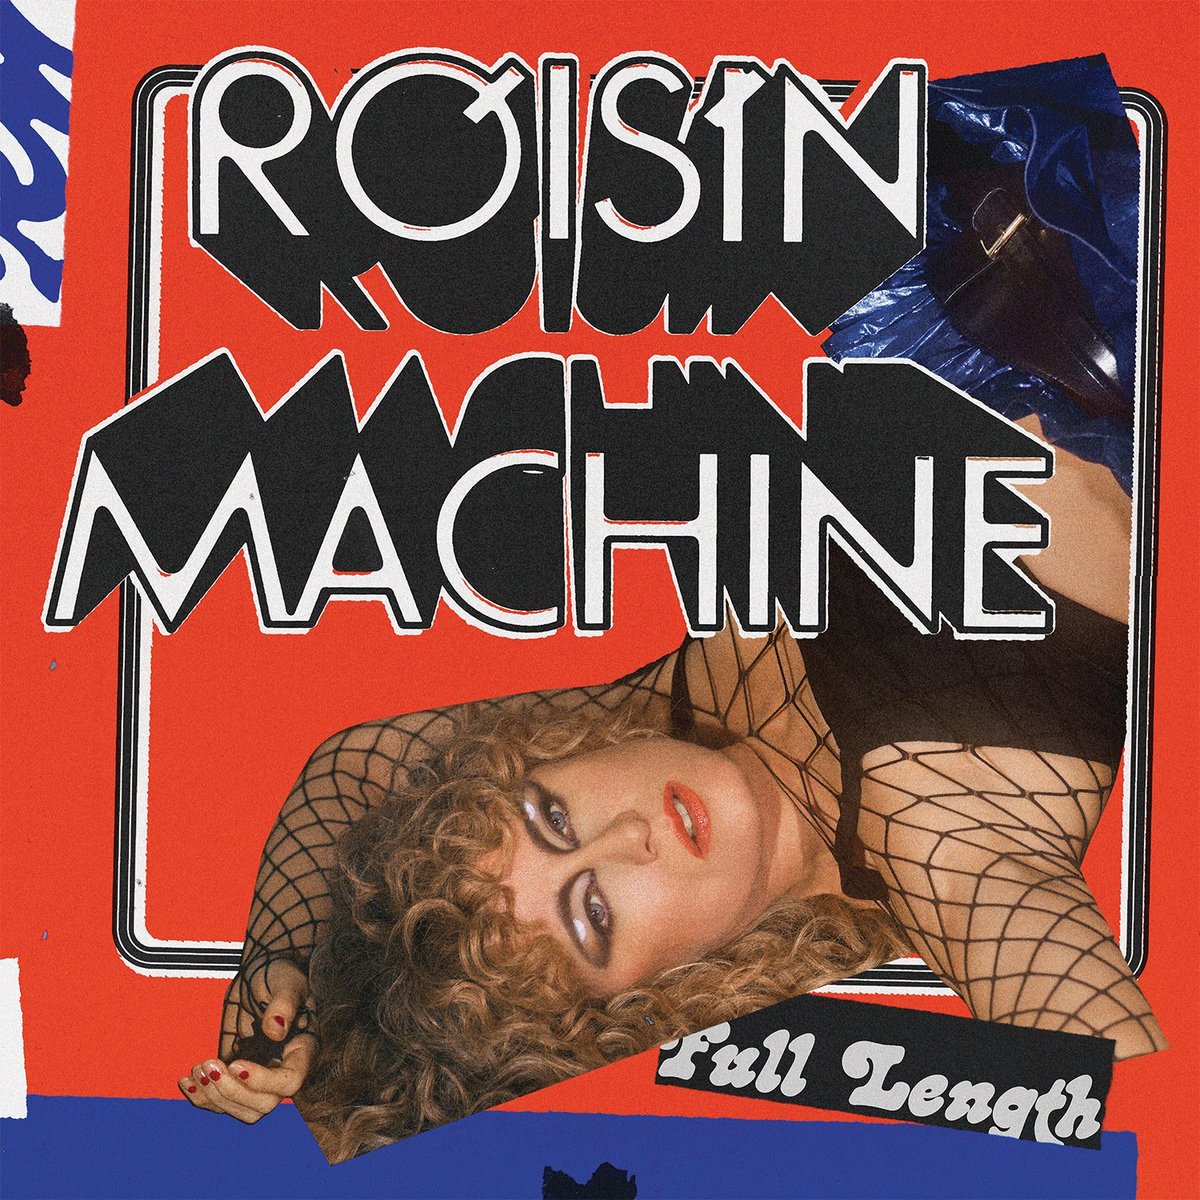 11. Róisín Machine - Róisín Murphy.Just missing out on the top 10 of my list is a fantastic album filled with great electronic/disco/house songs.  Her livestream show was fantastic too. Best tracks:Something MoreIncapableMurphy's LawKingdom Of Ends @roisinmurphy